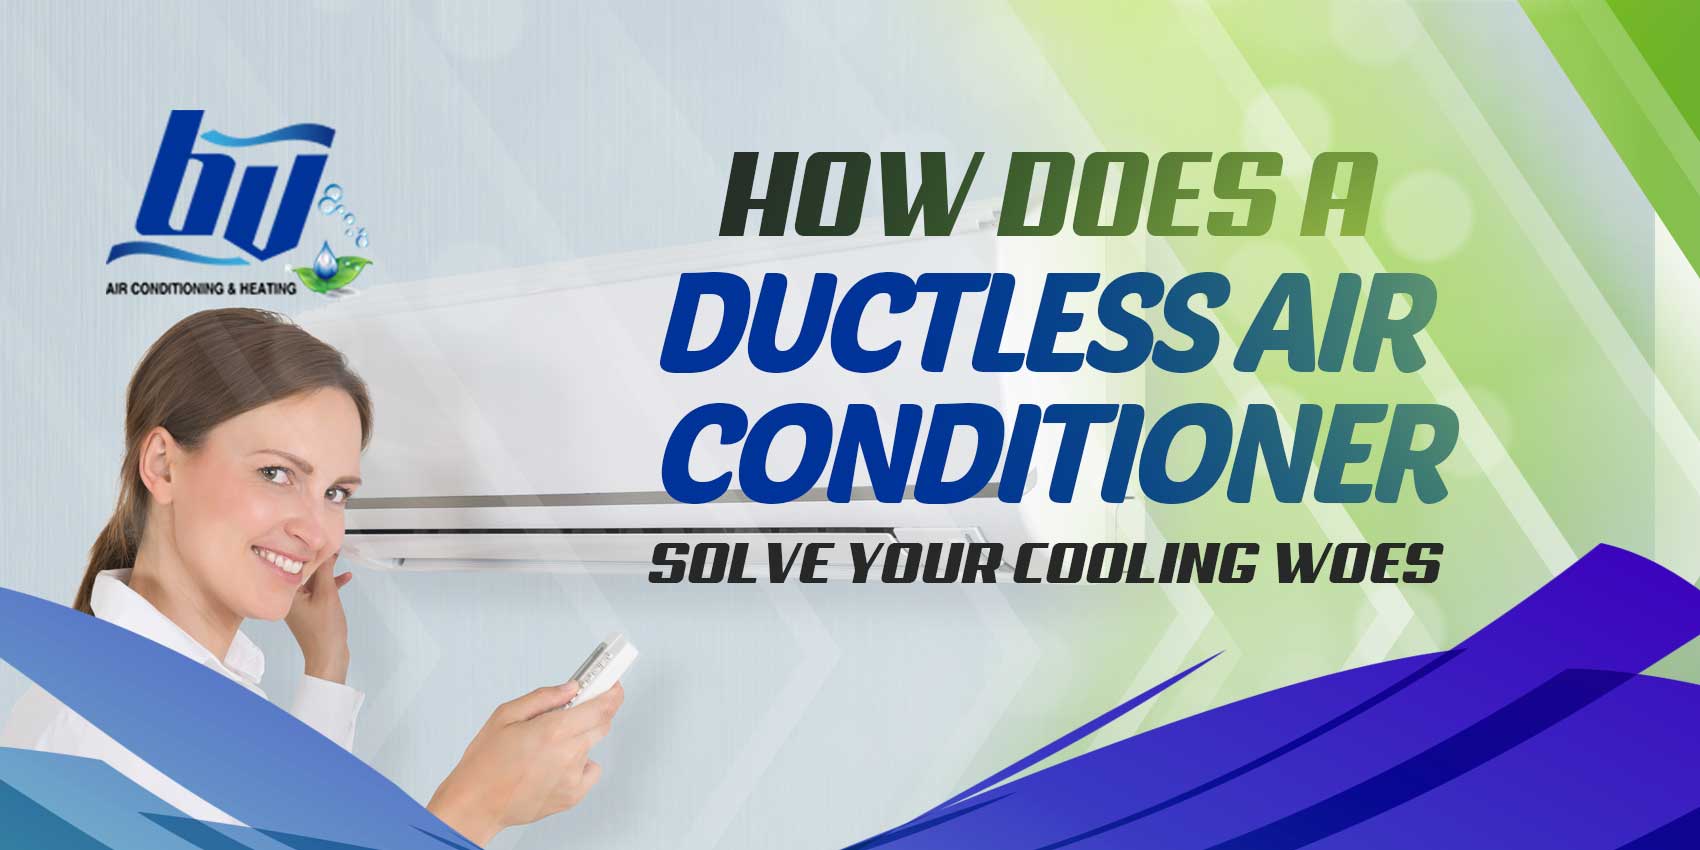 How Does a Ductless Air Conditioner Solve Your Cooling Woes